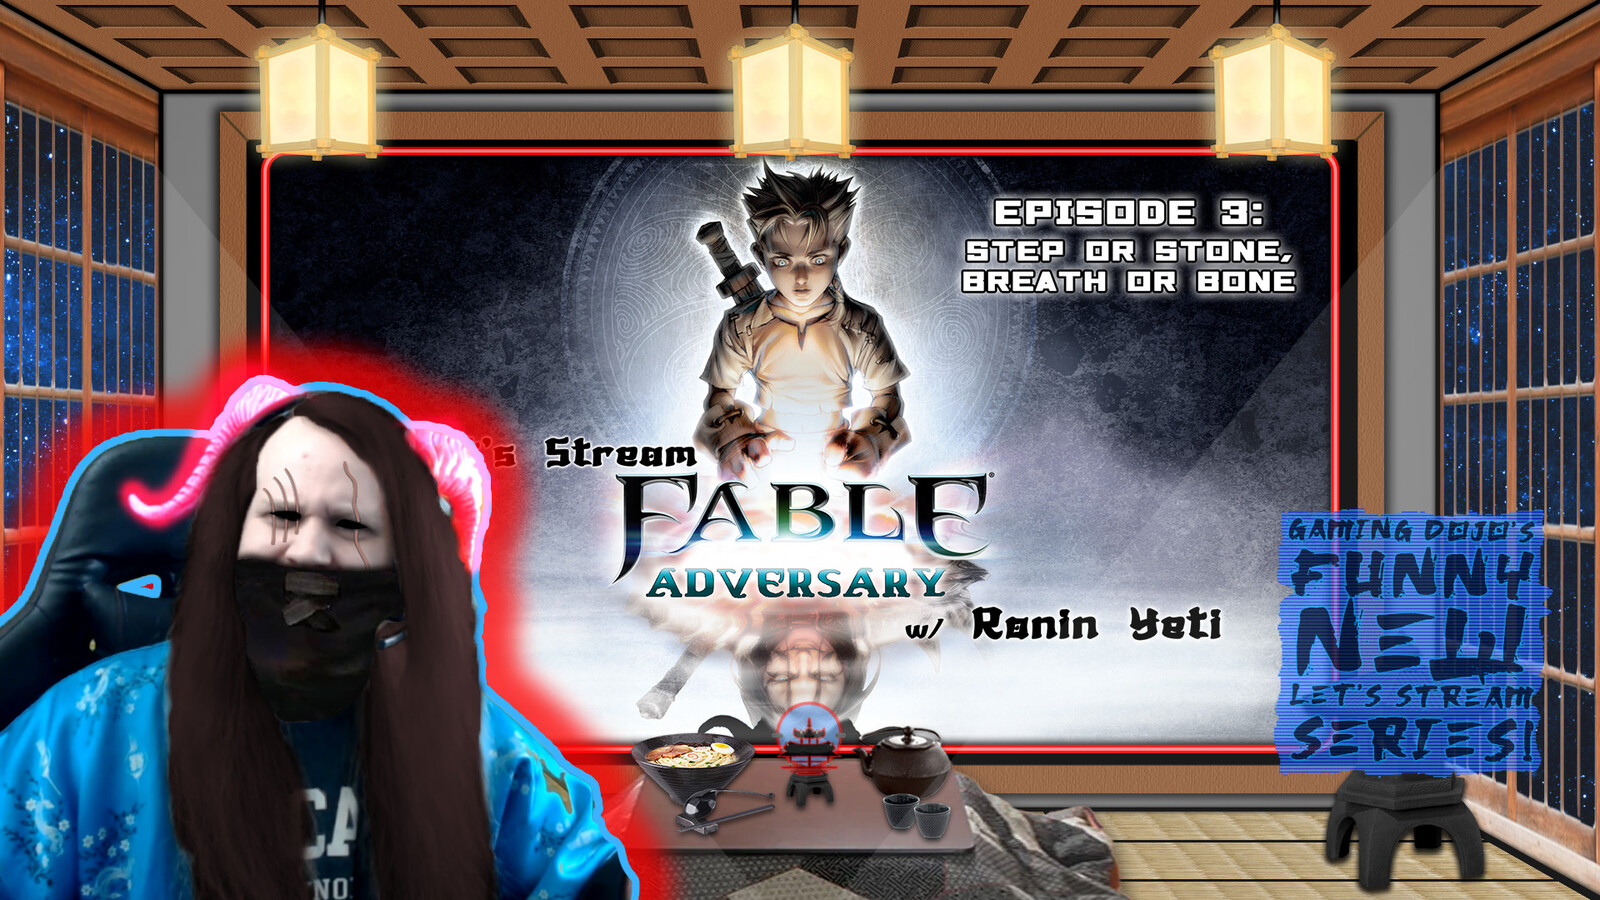 Let's Stream "Fable: Adversary" Episode 3 Image | Ronin Yeti Twitch Streaming